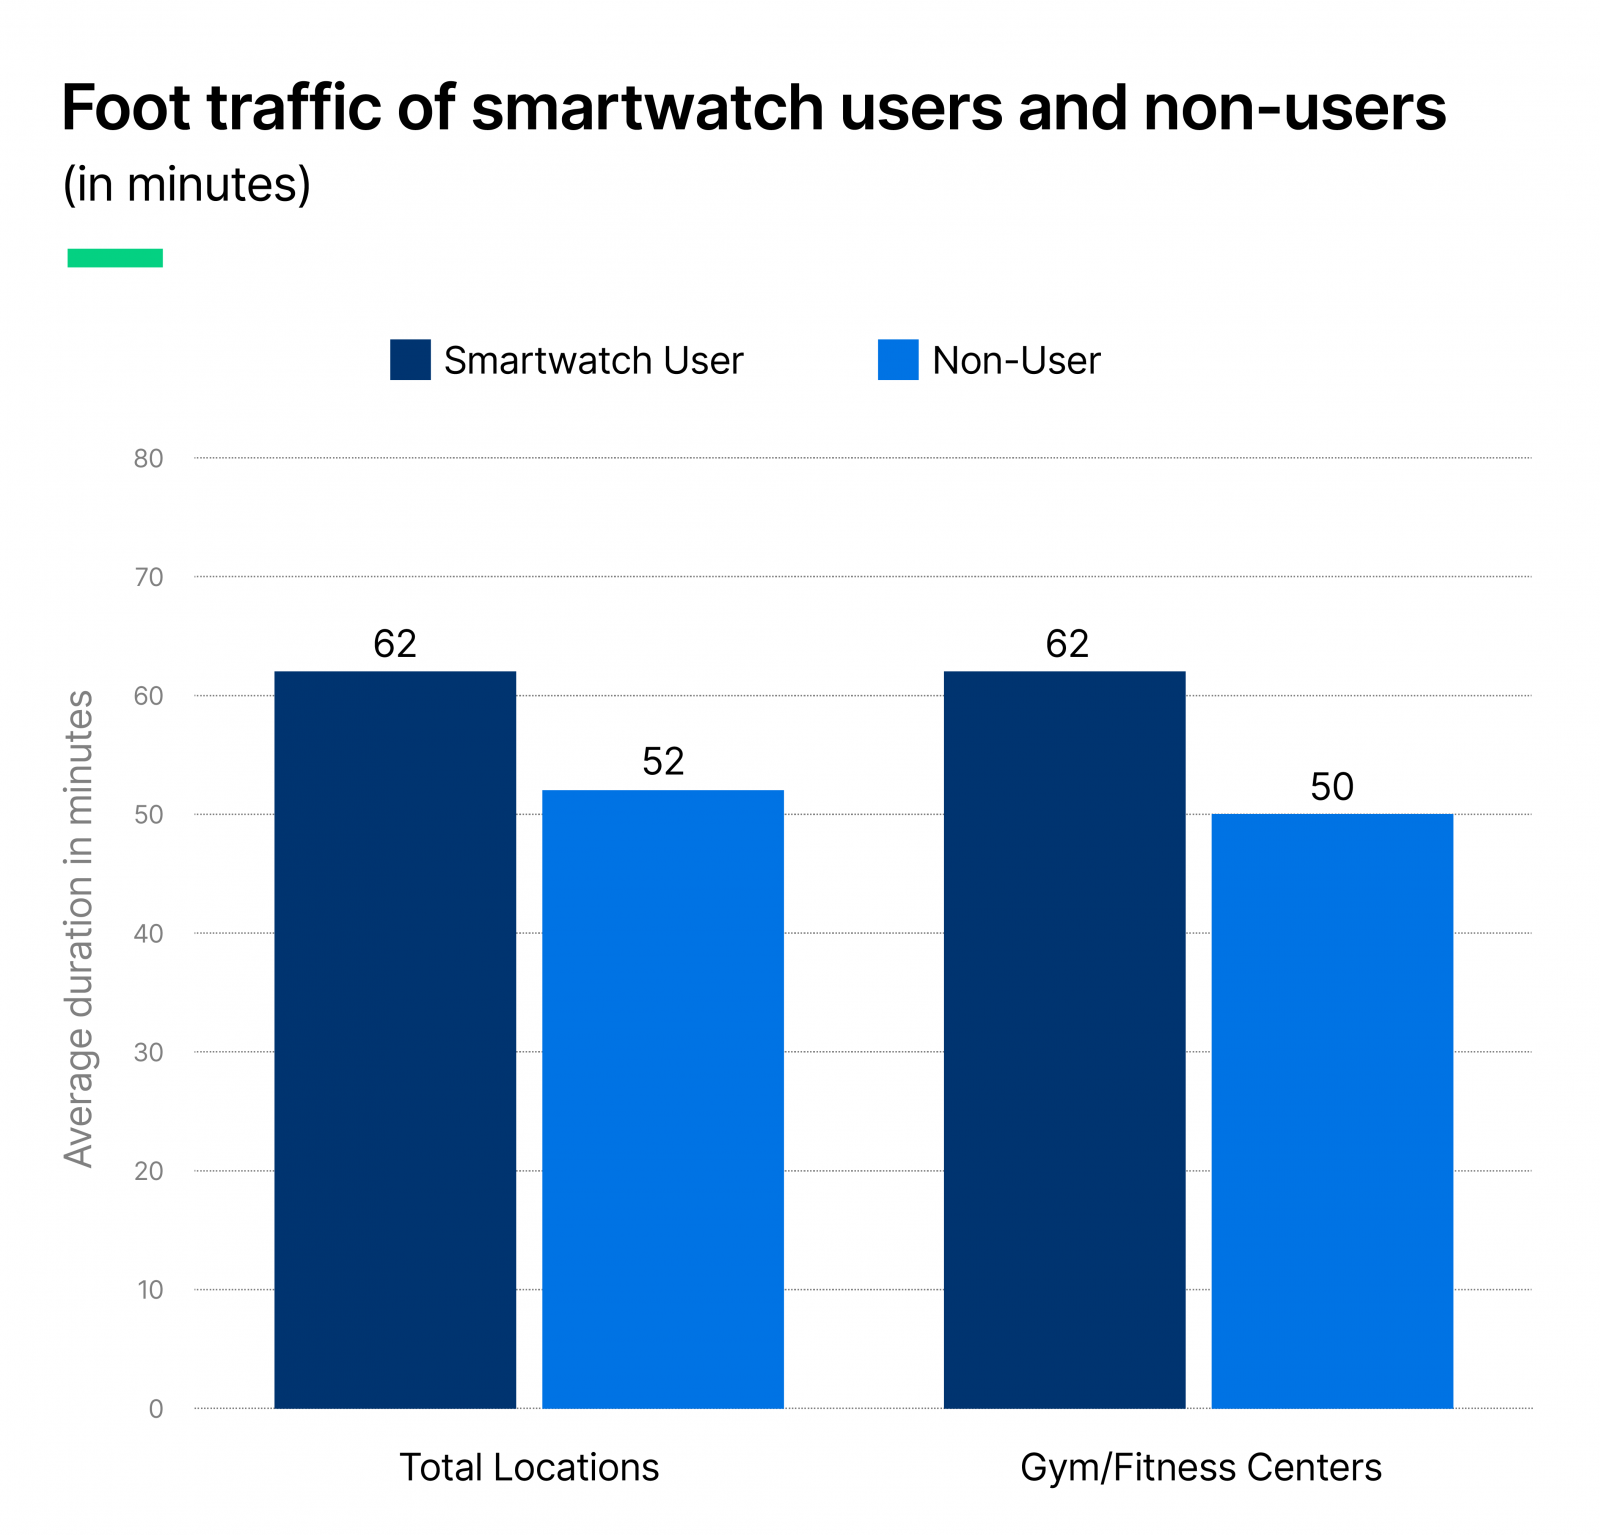 Foot traffic of smartwatch users and non-users in minutes.